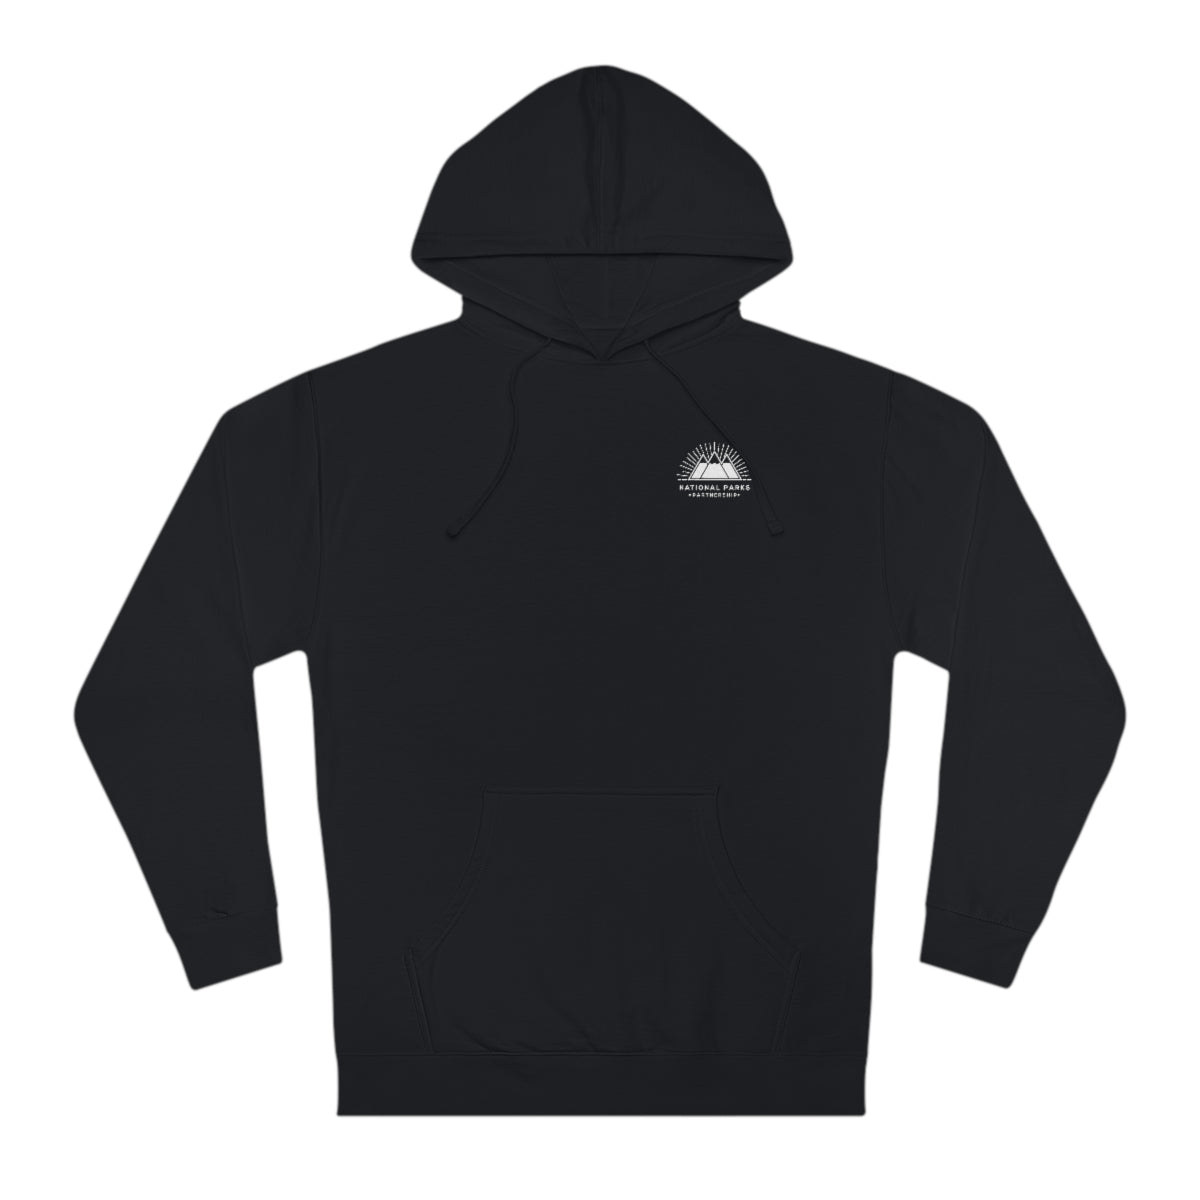 Canyonlands National Park Hoodie - Lines